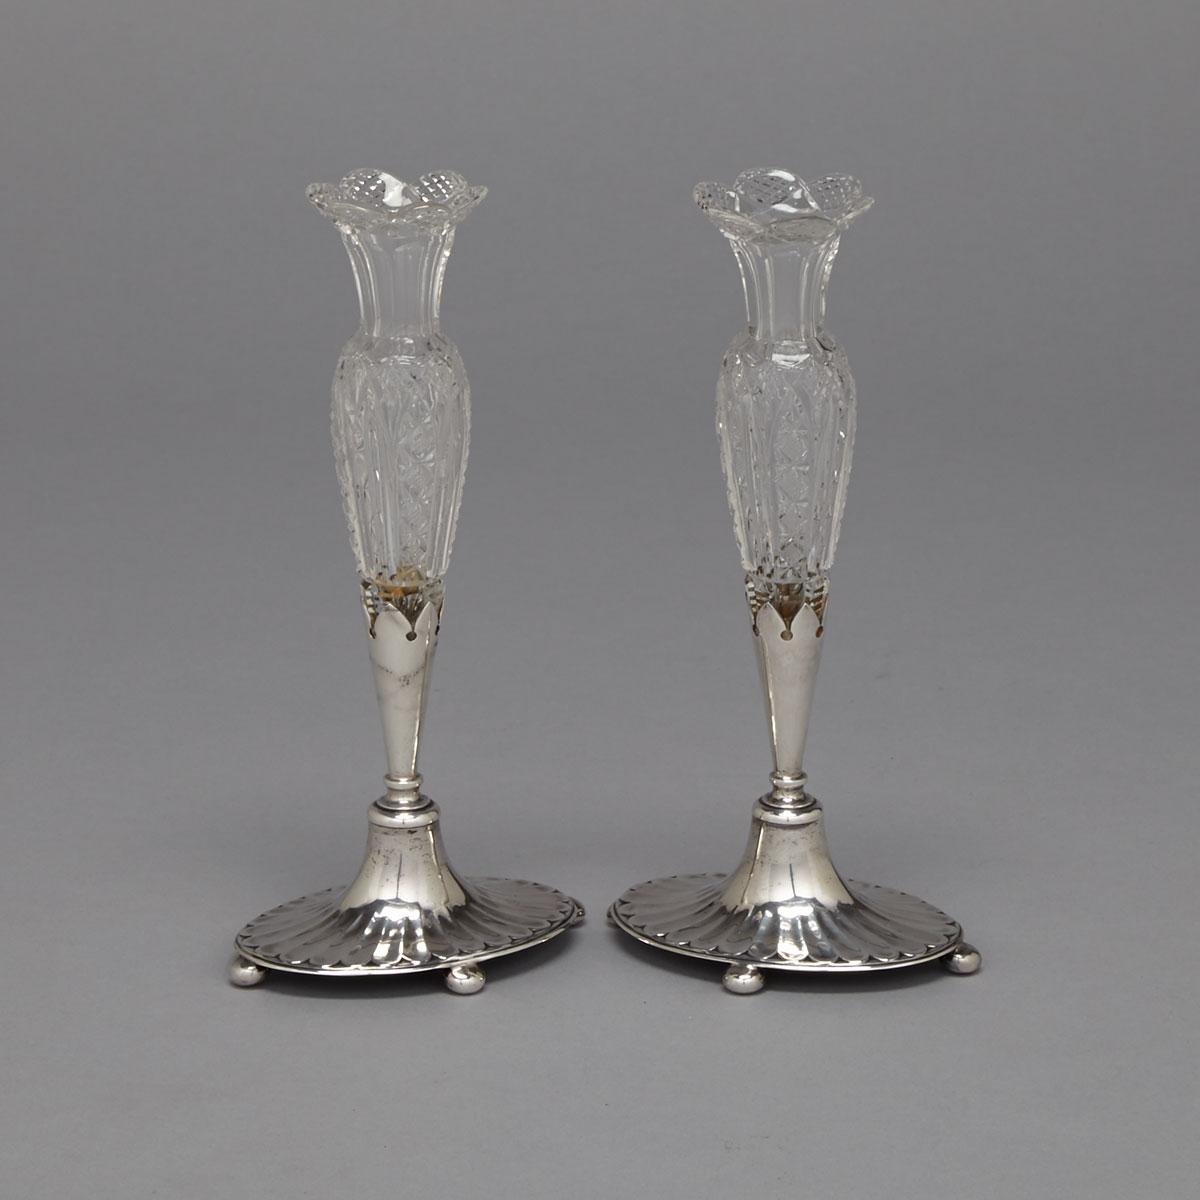 Pair of Edwardian Silver Mounted Cut Glass Bud Vases, Joseph Rodgers & Sons, Sheffield, 1902